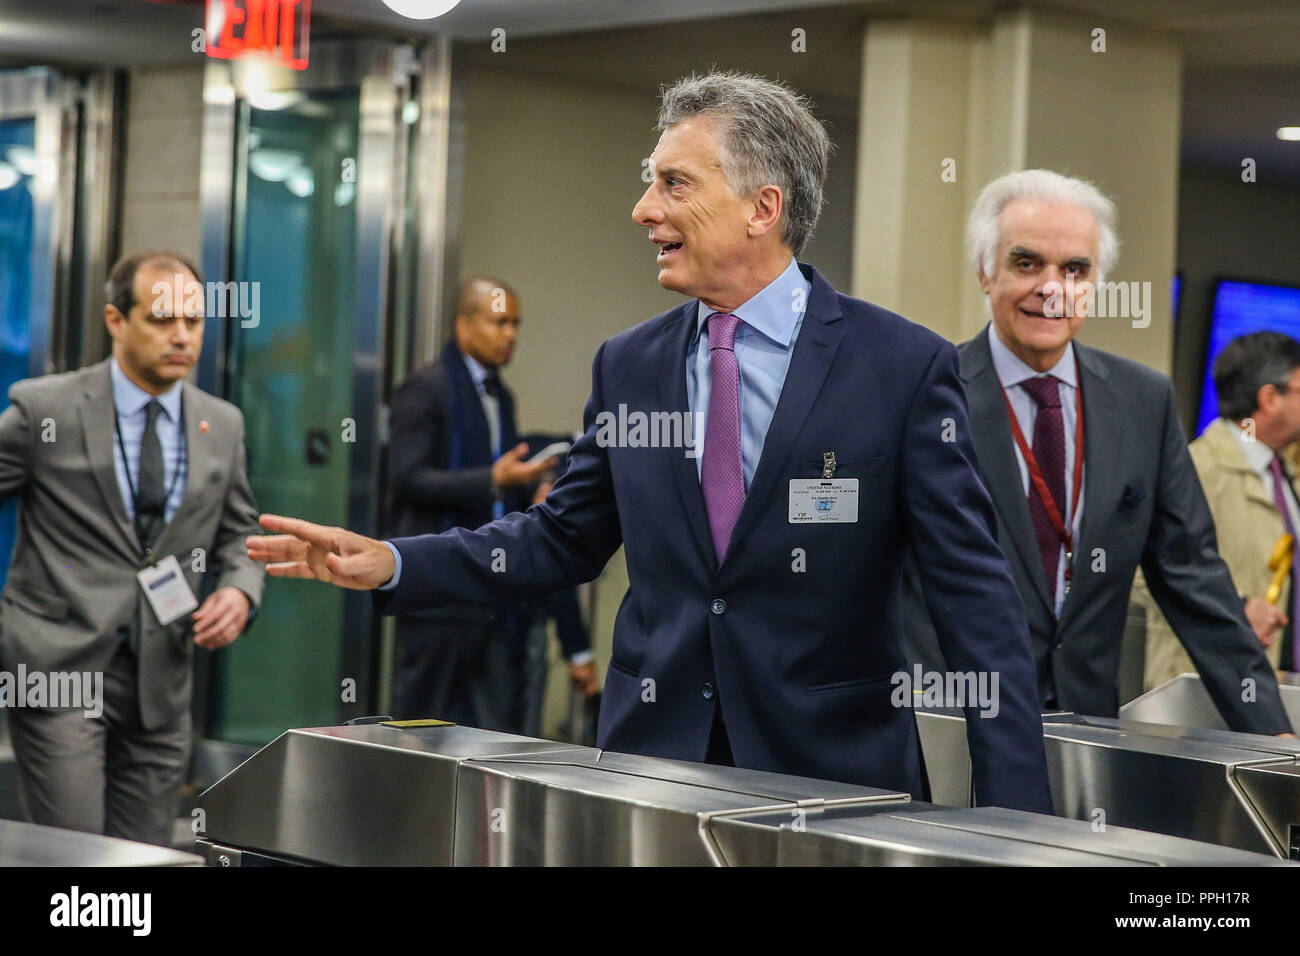 New York, USA. 25th September, 2018. Mauricio Macri, president of Argentina during the 73rd session of the UN General Assembly at the United Nations Headquarters in New York on Tuesday, 25. (Photo: Vanessa Carvalho / Brazil Photo Press) Credit: Brazil Photo Press/Alamy Live News Stock Photo